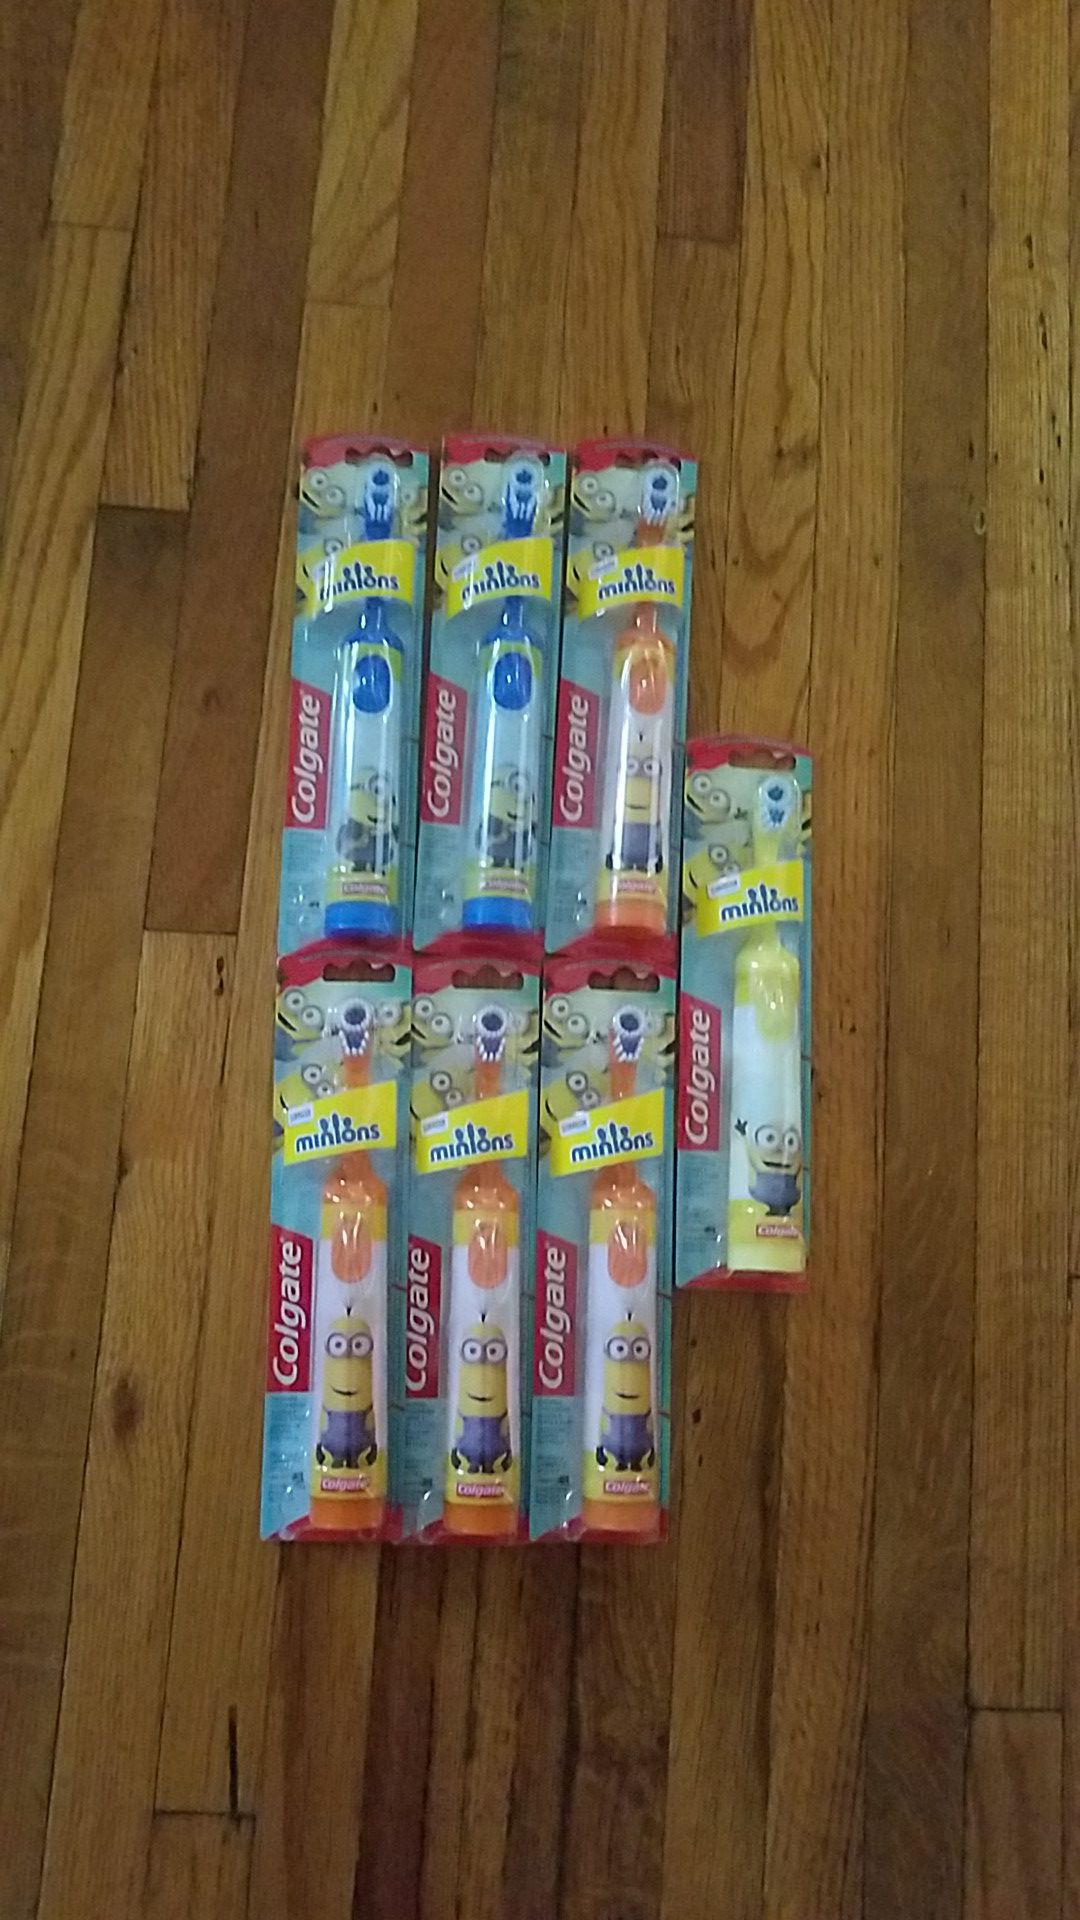 Colgate kids powered toothbrushes $3 each